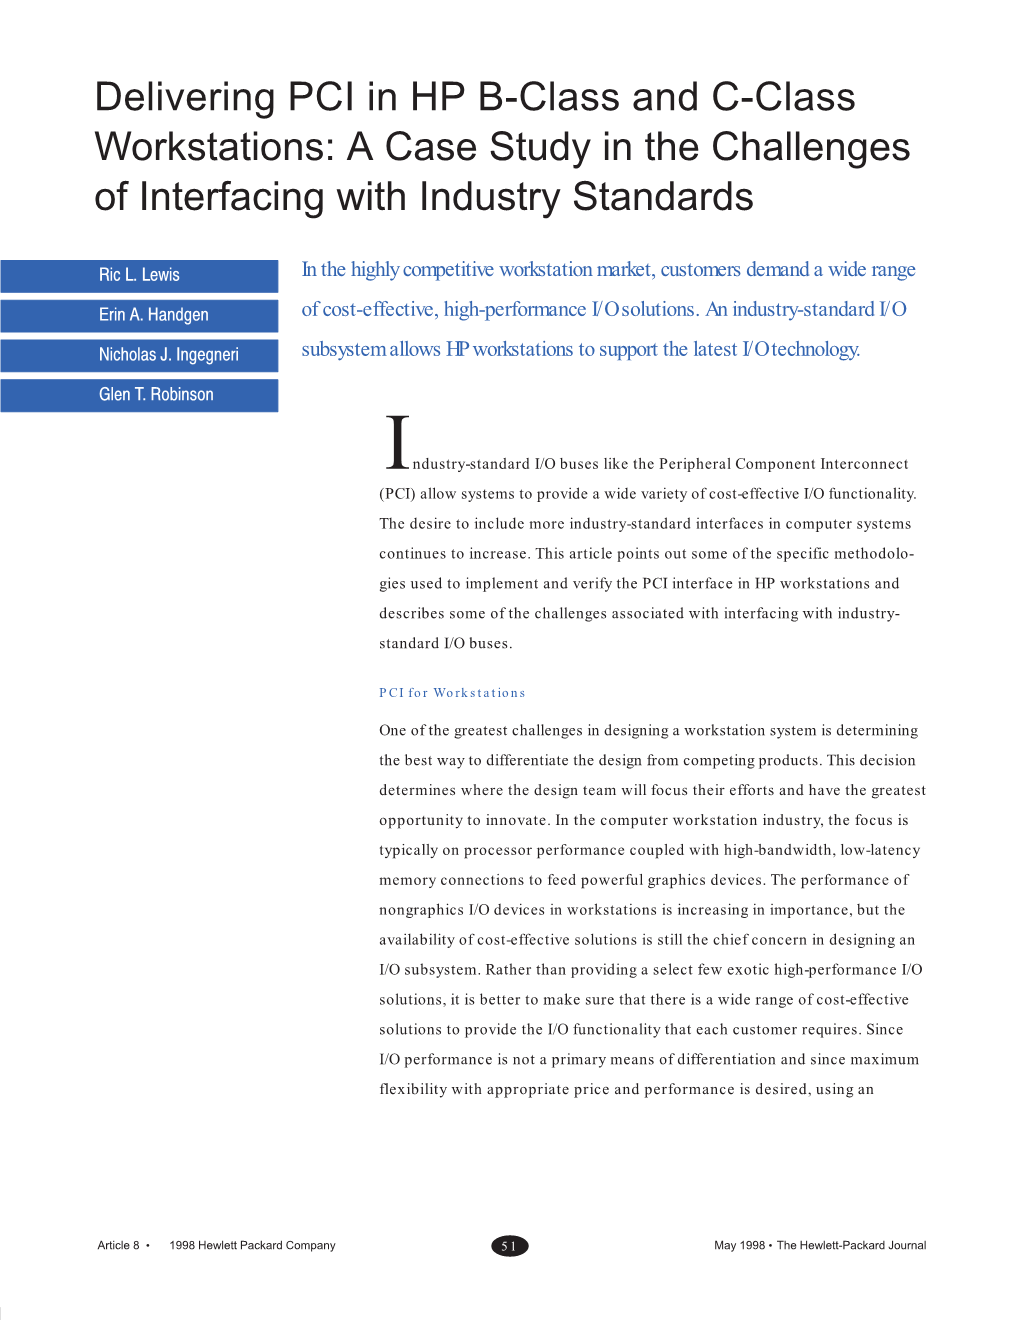 Delivering PCI in HP B-Class and C-Class Workstations: a Case Study in the Challenges of Interfacing with Industry Standards